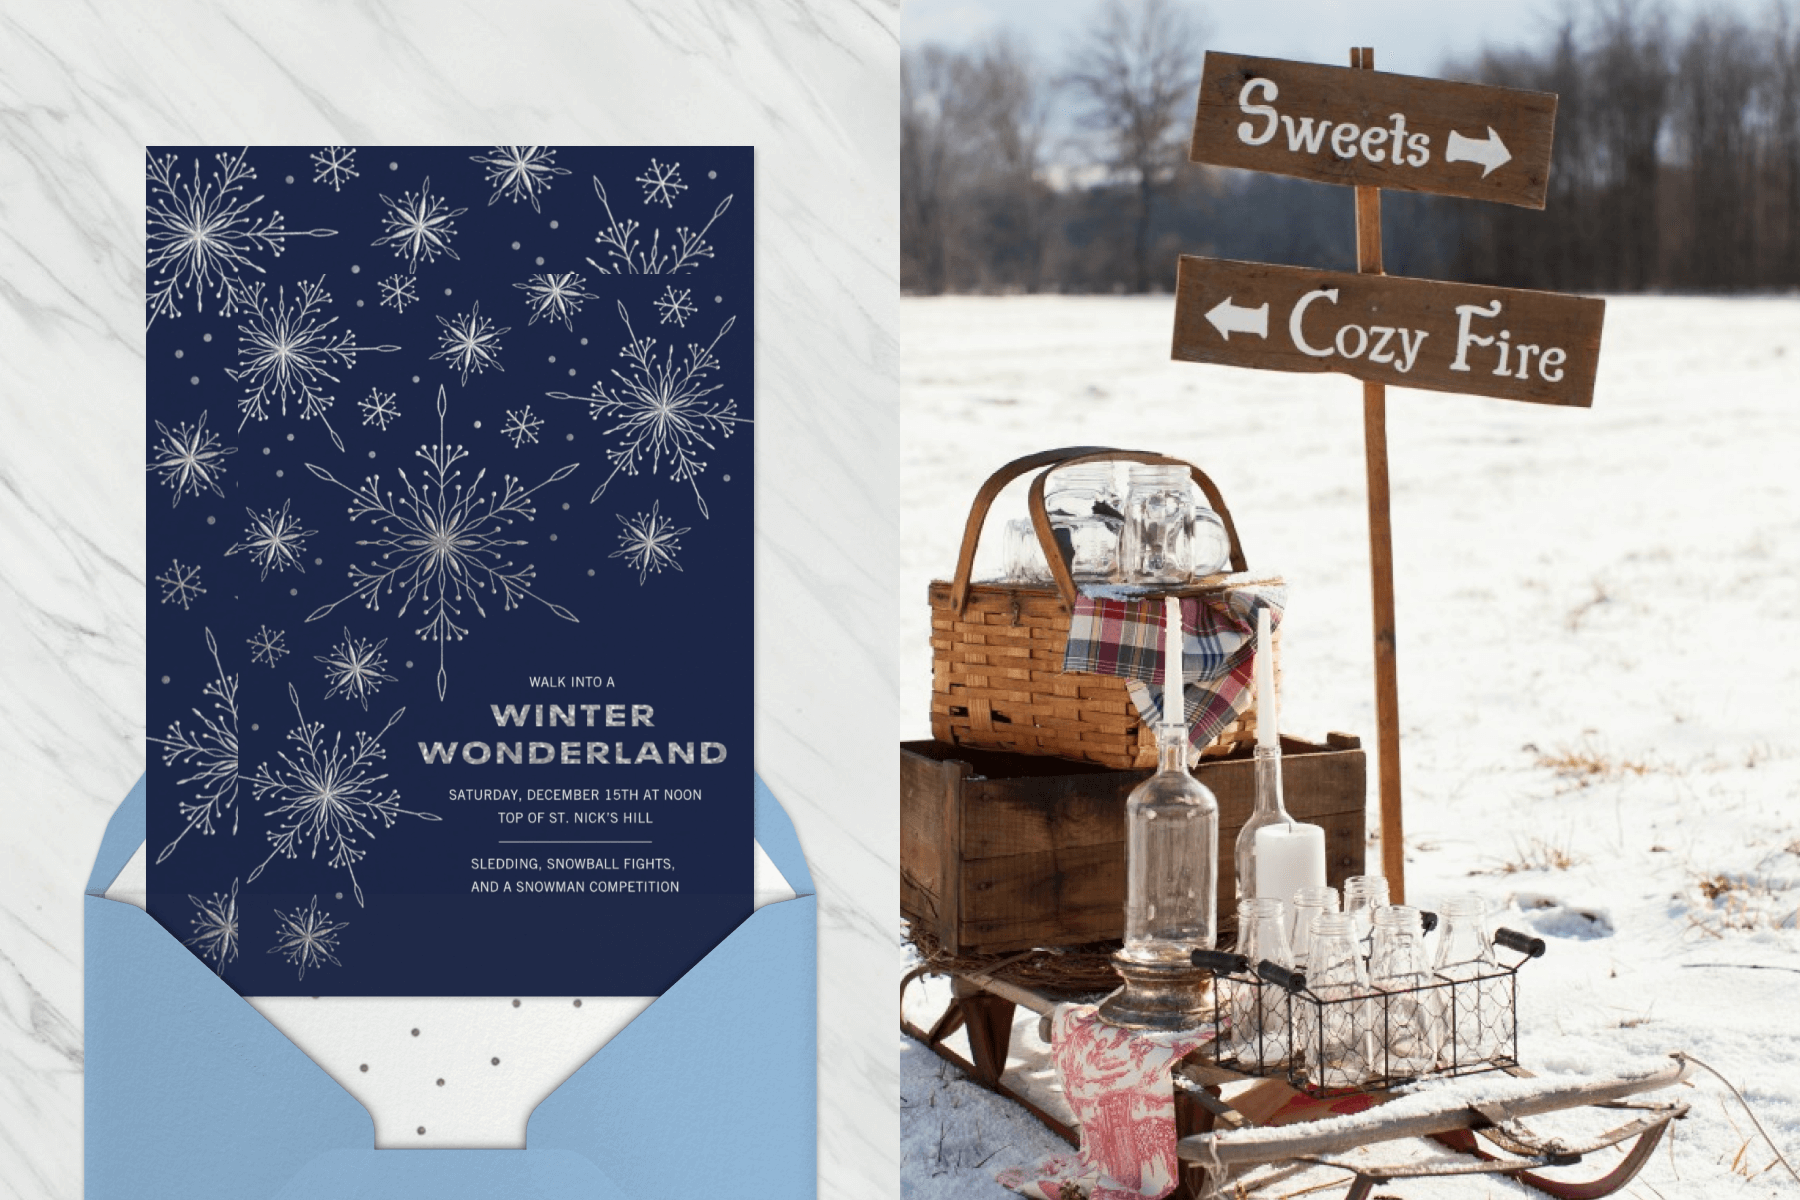 Left: A holiday party invitation with illustrated snowflakes; Right: A sled with party supplies.